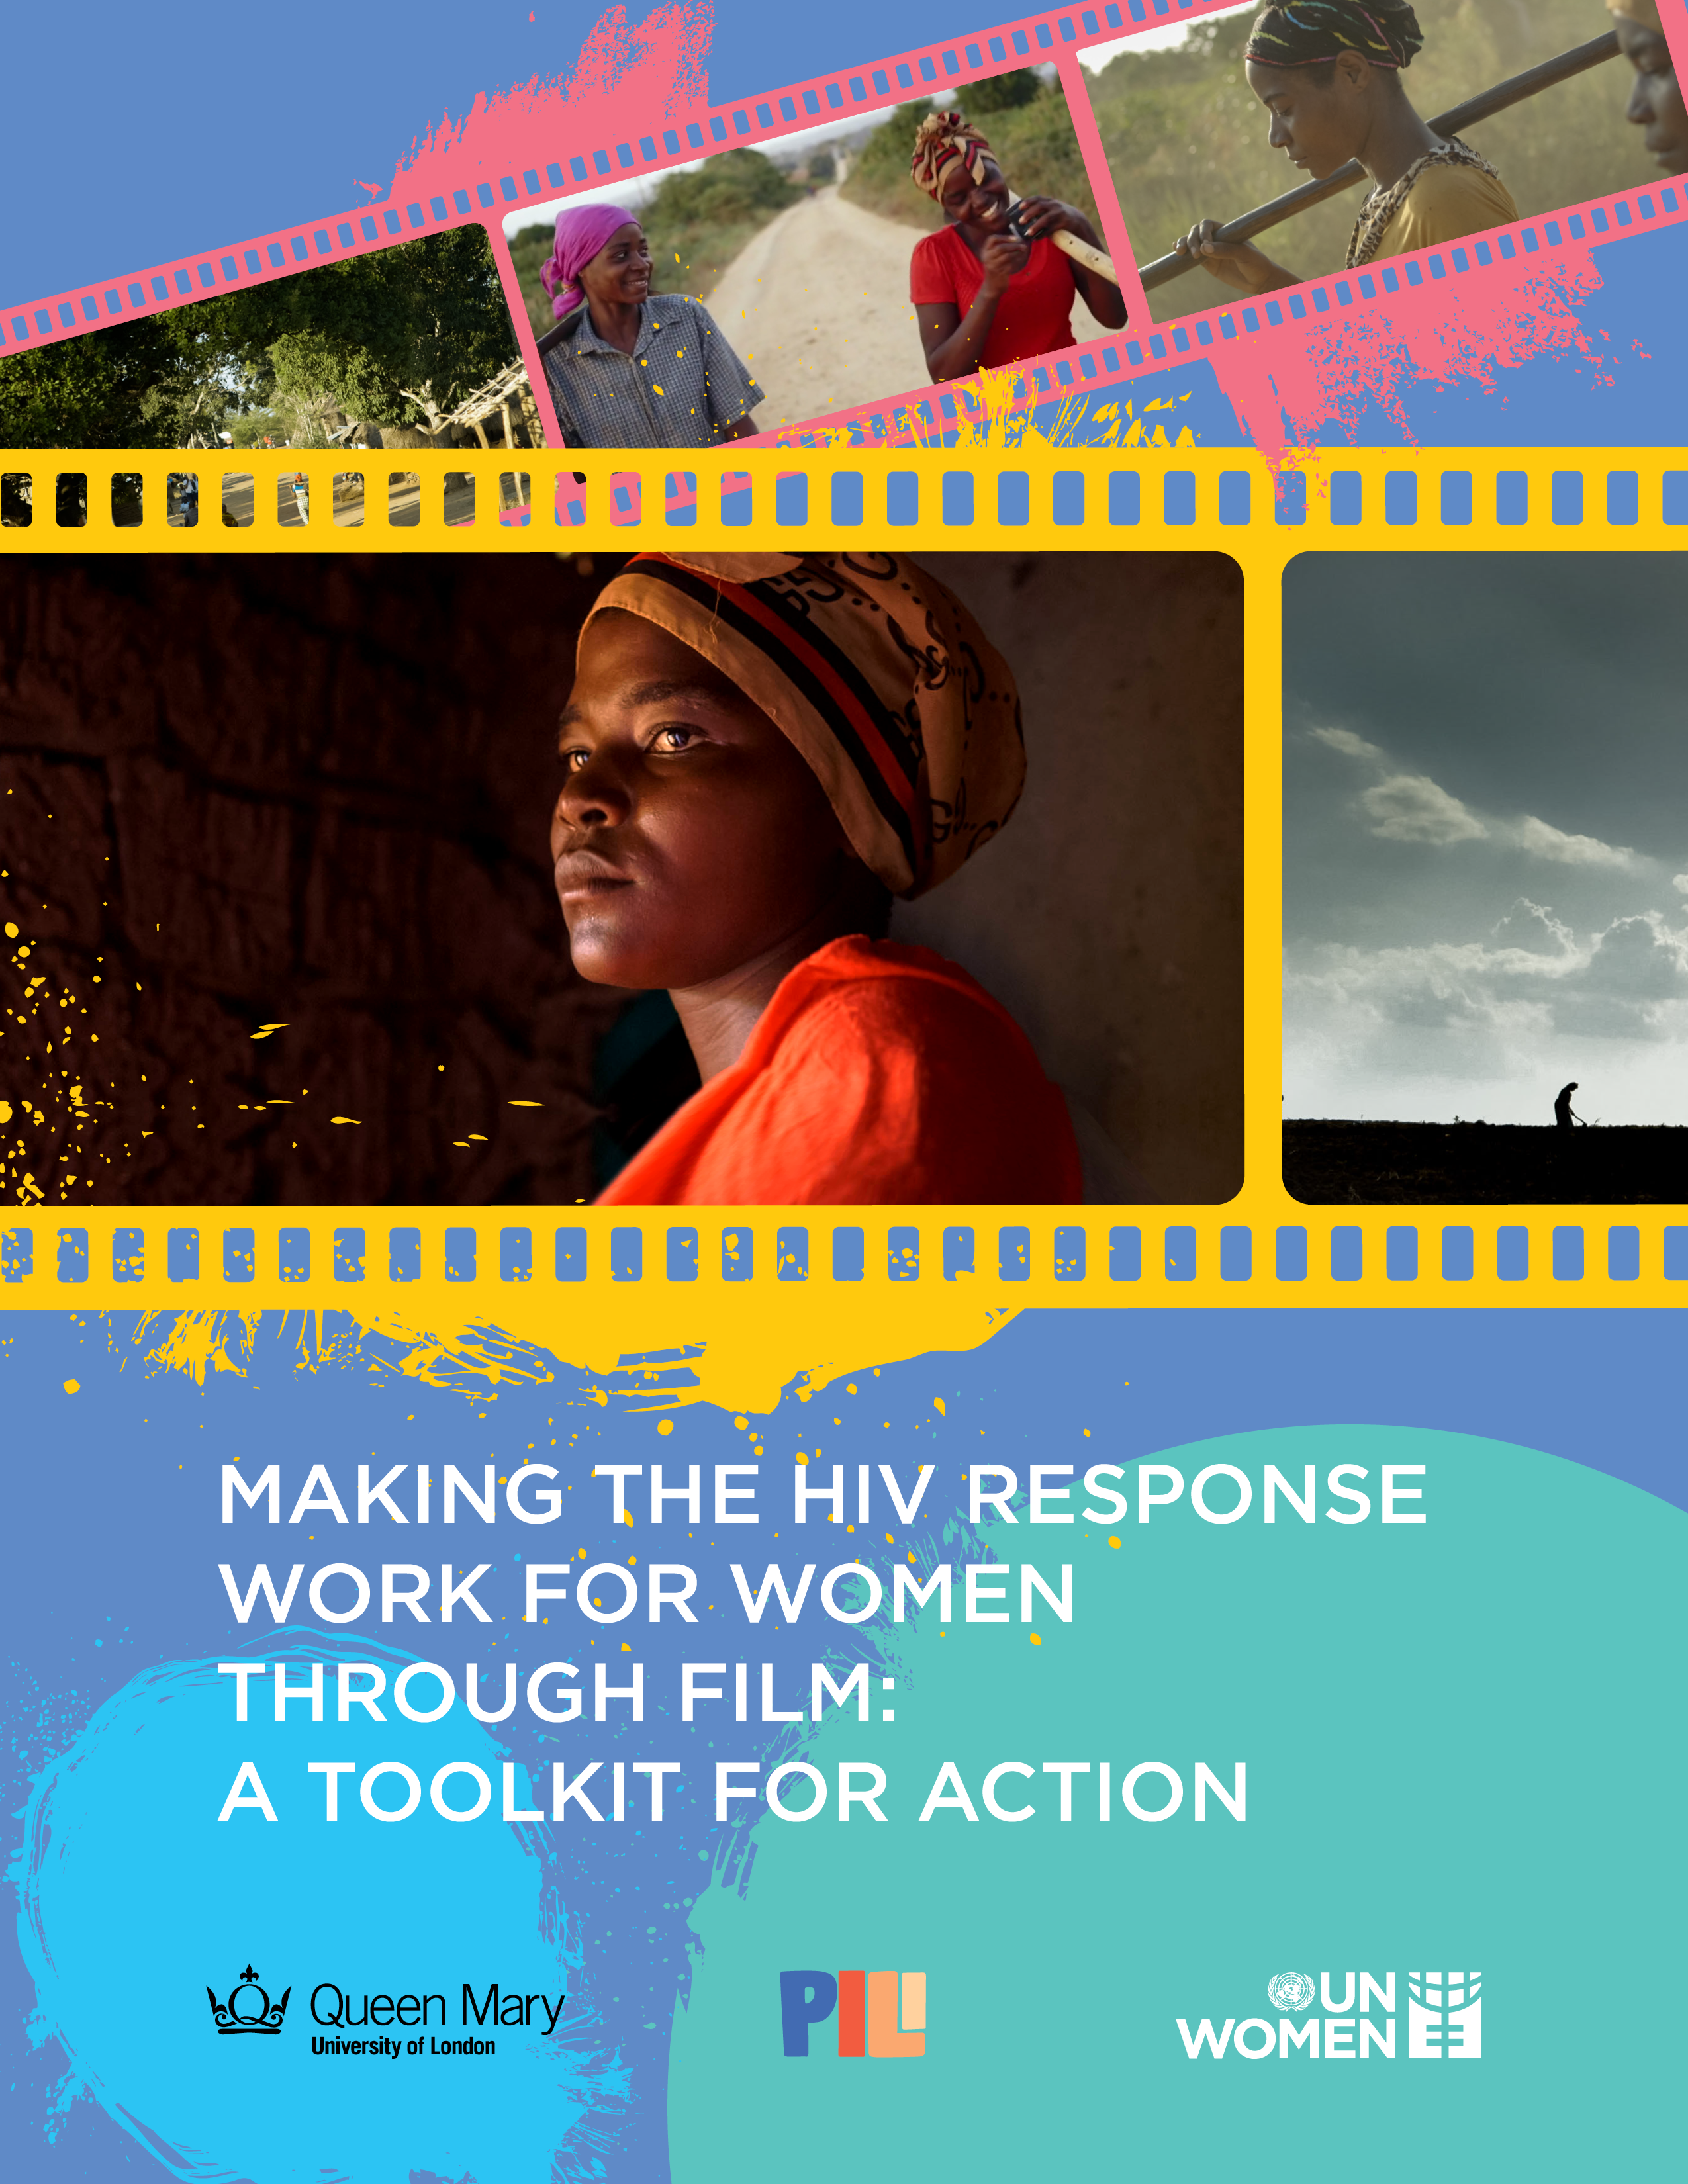 Making the HIV Response Work for Women Through Film: A Toolkit for Action